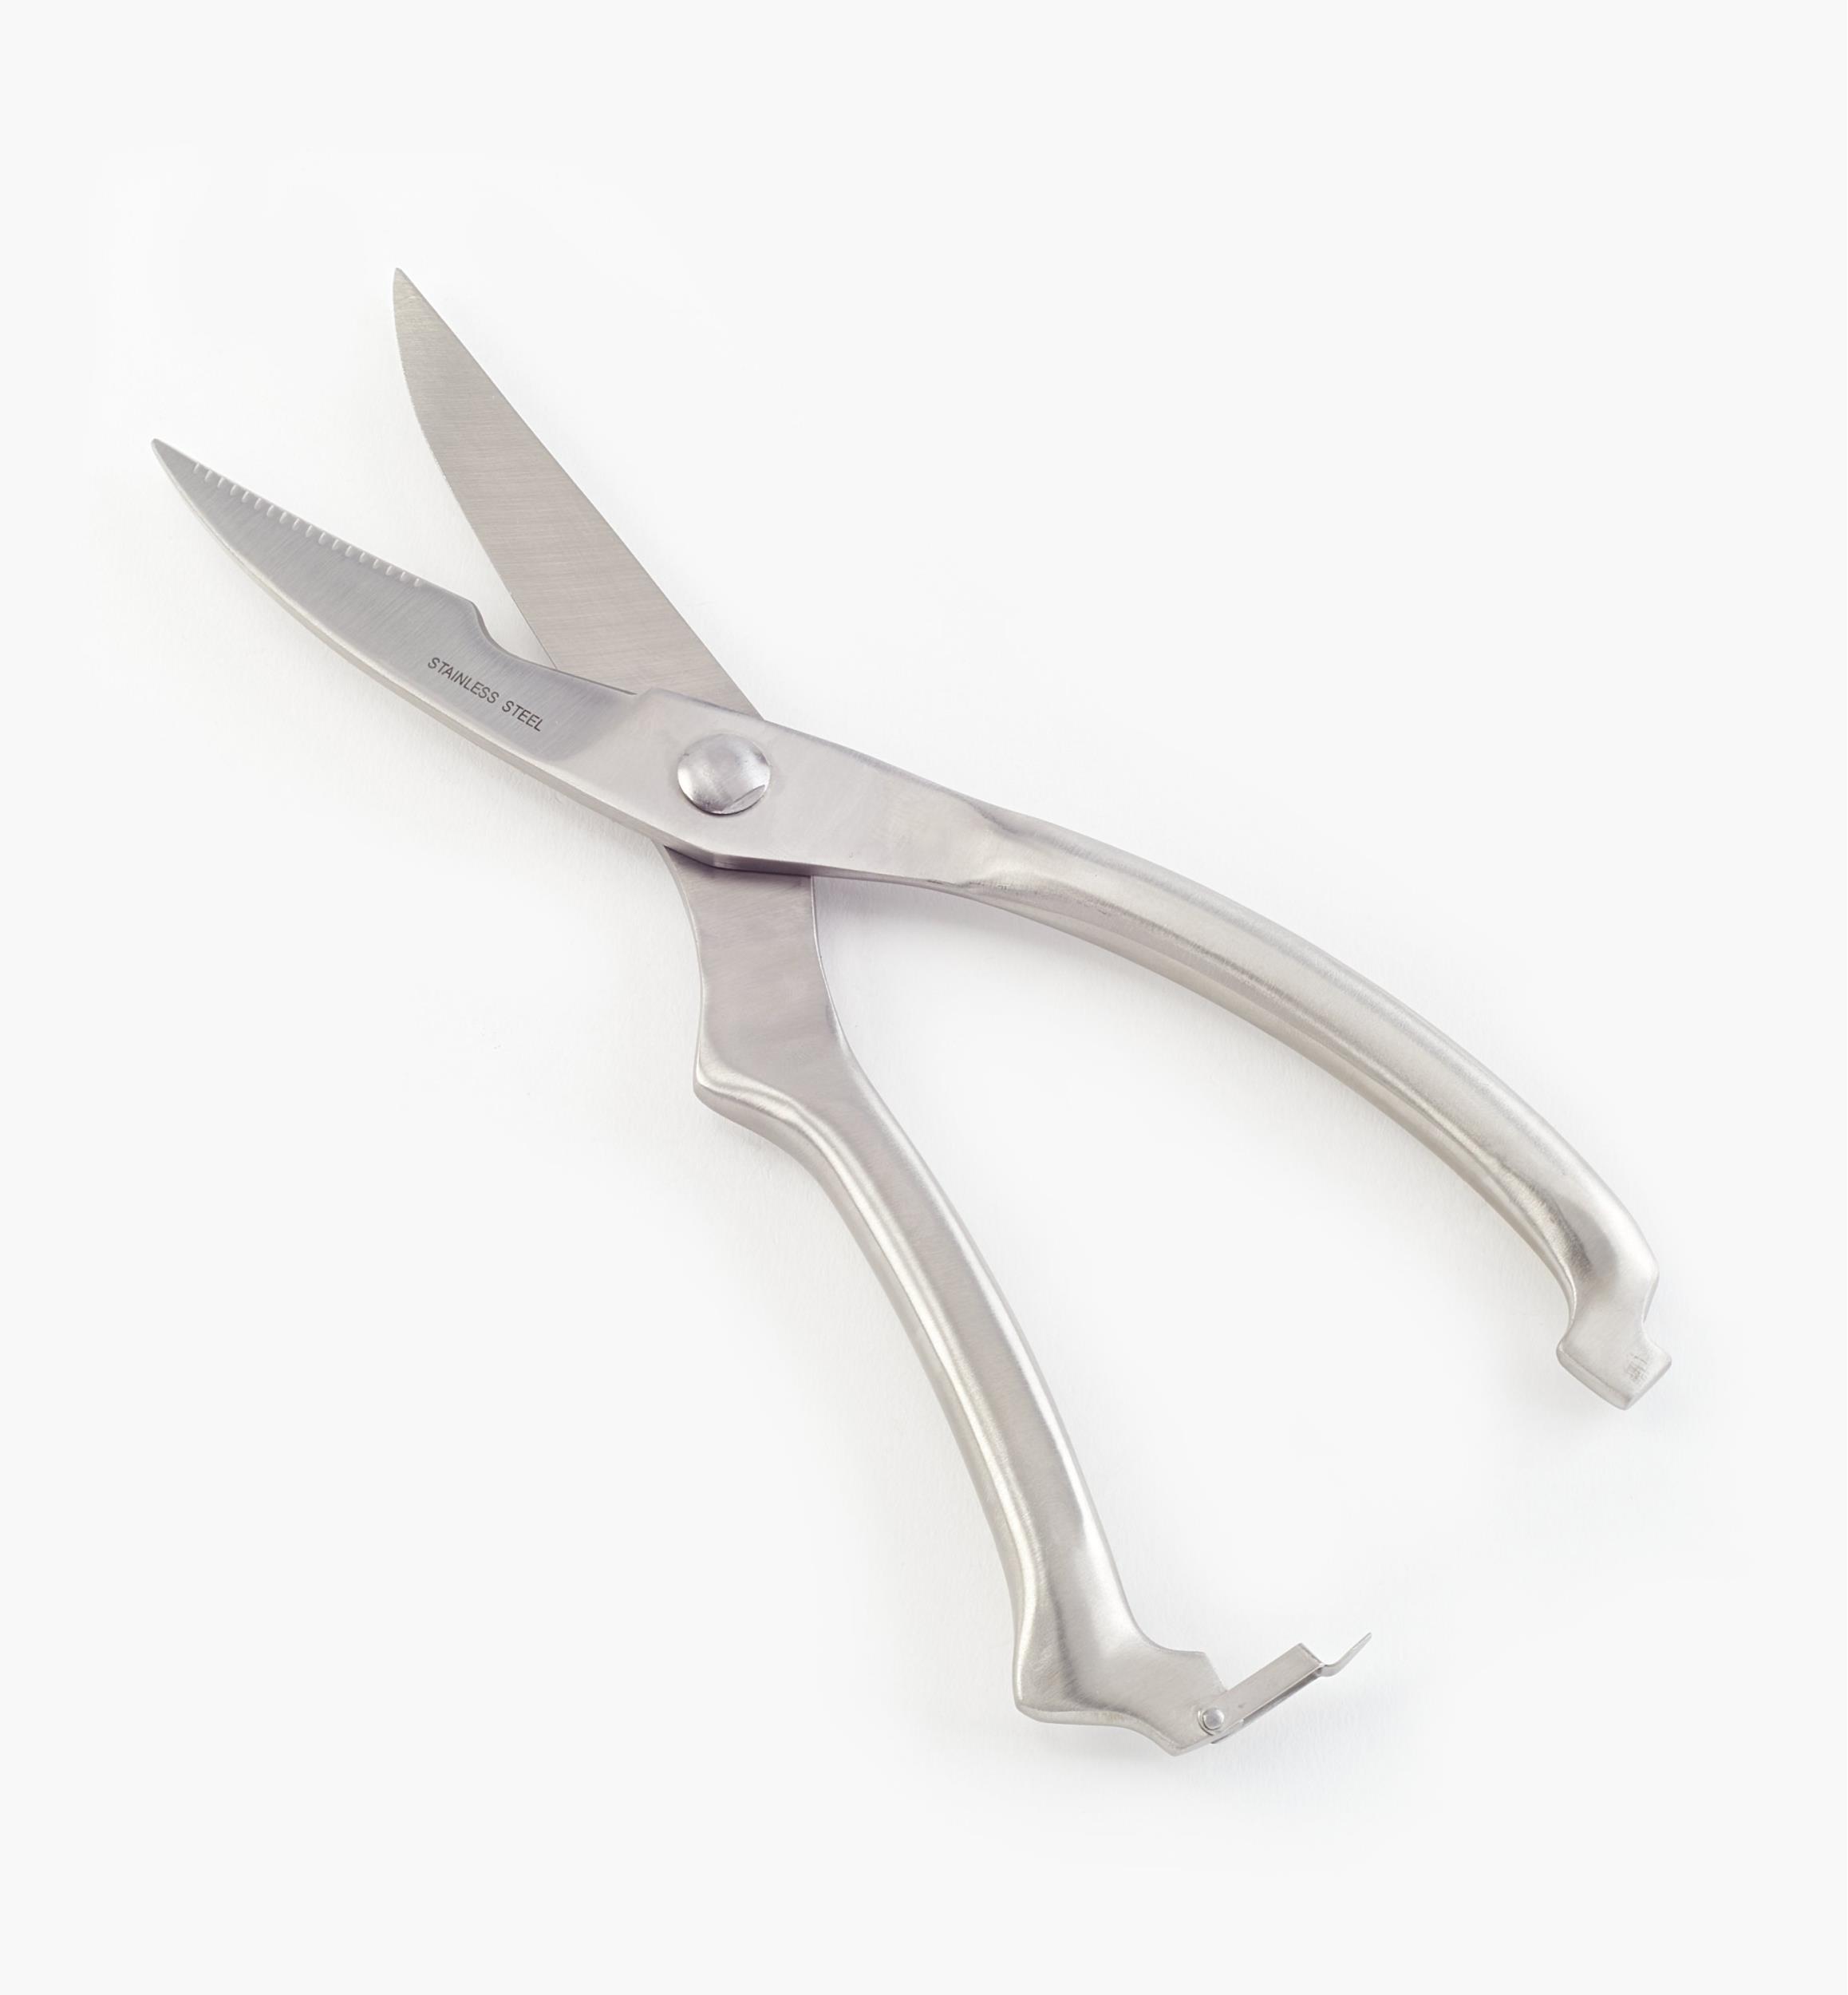 Poultry Shears - Stainless Steel – Bear Paw Distribution